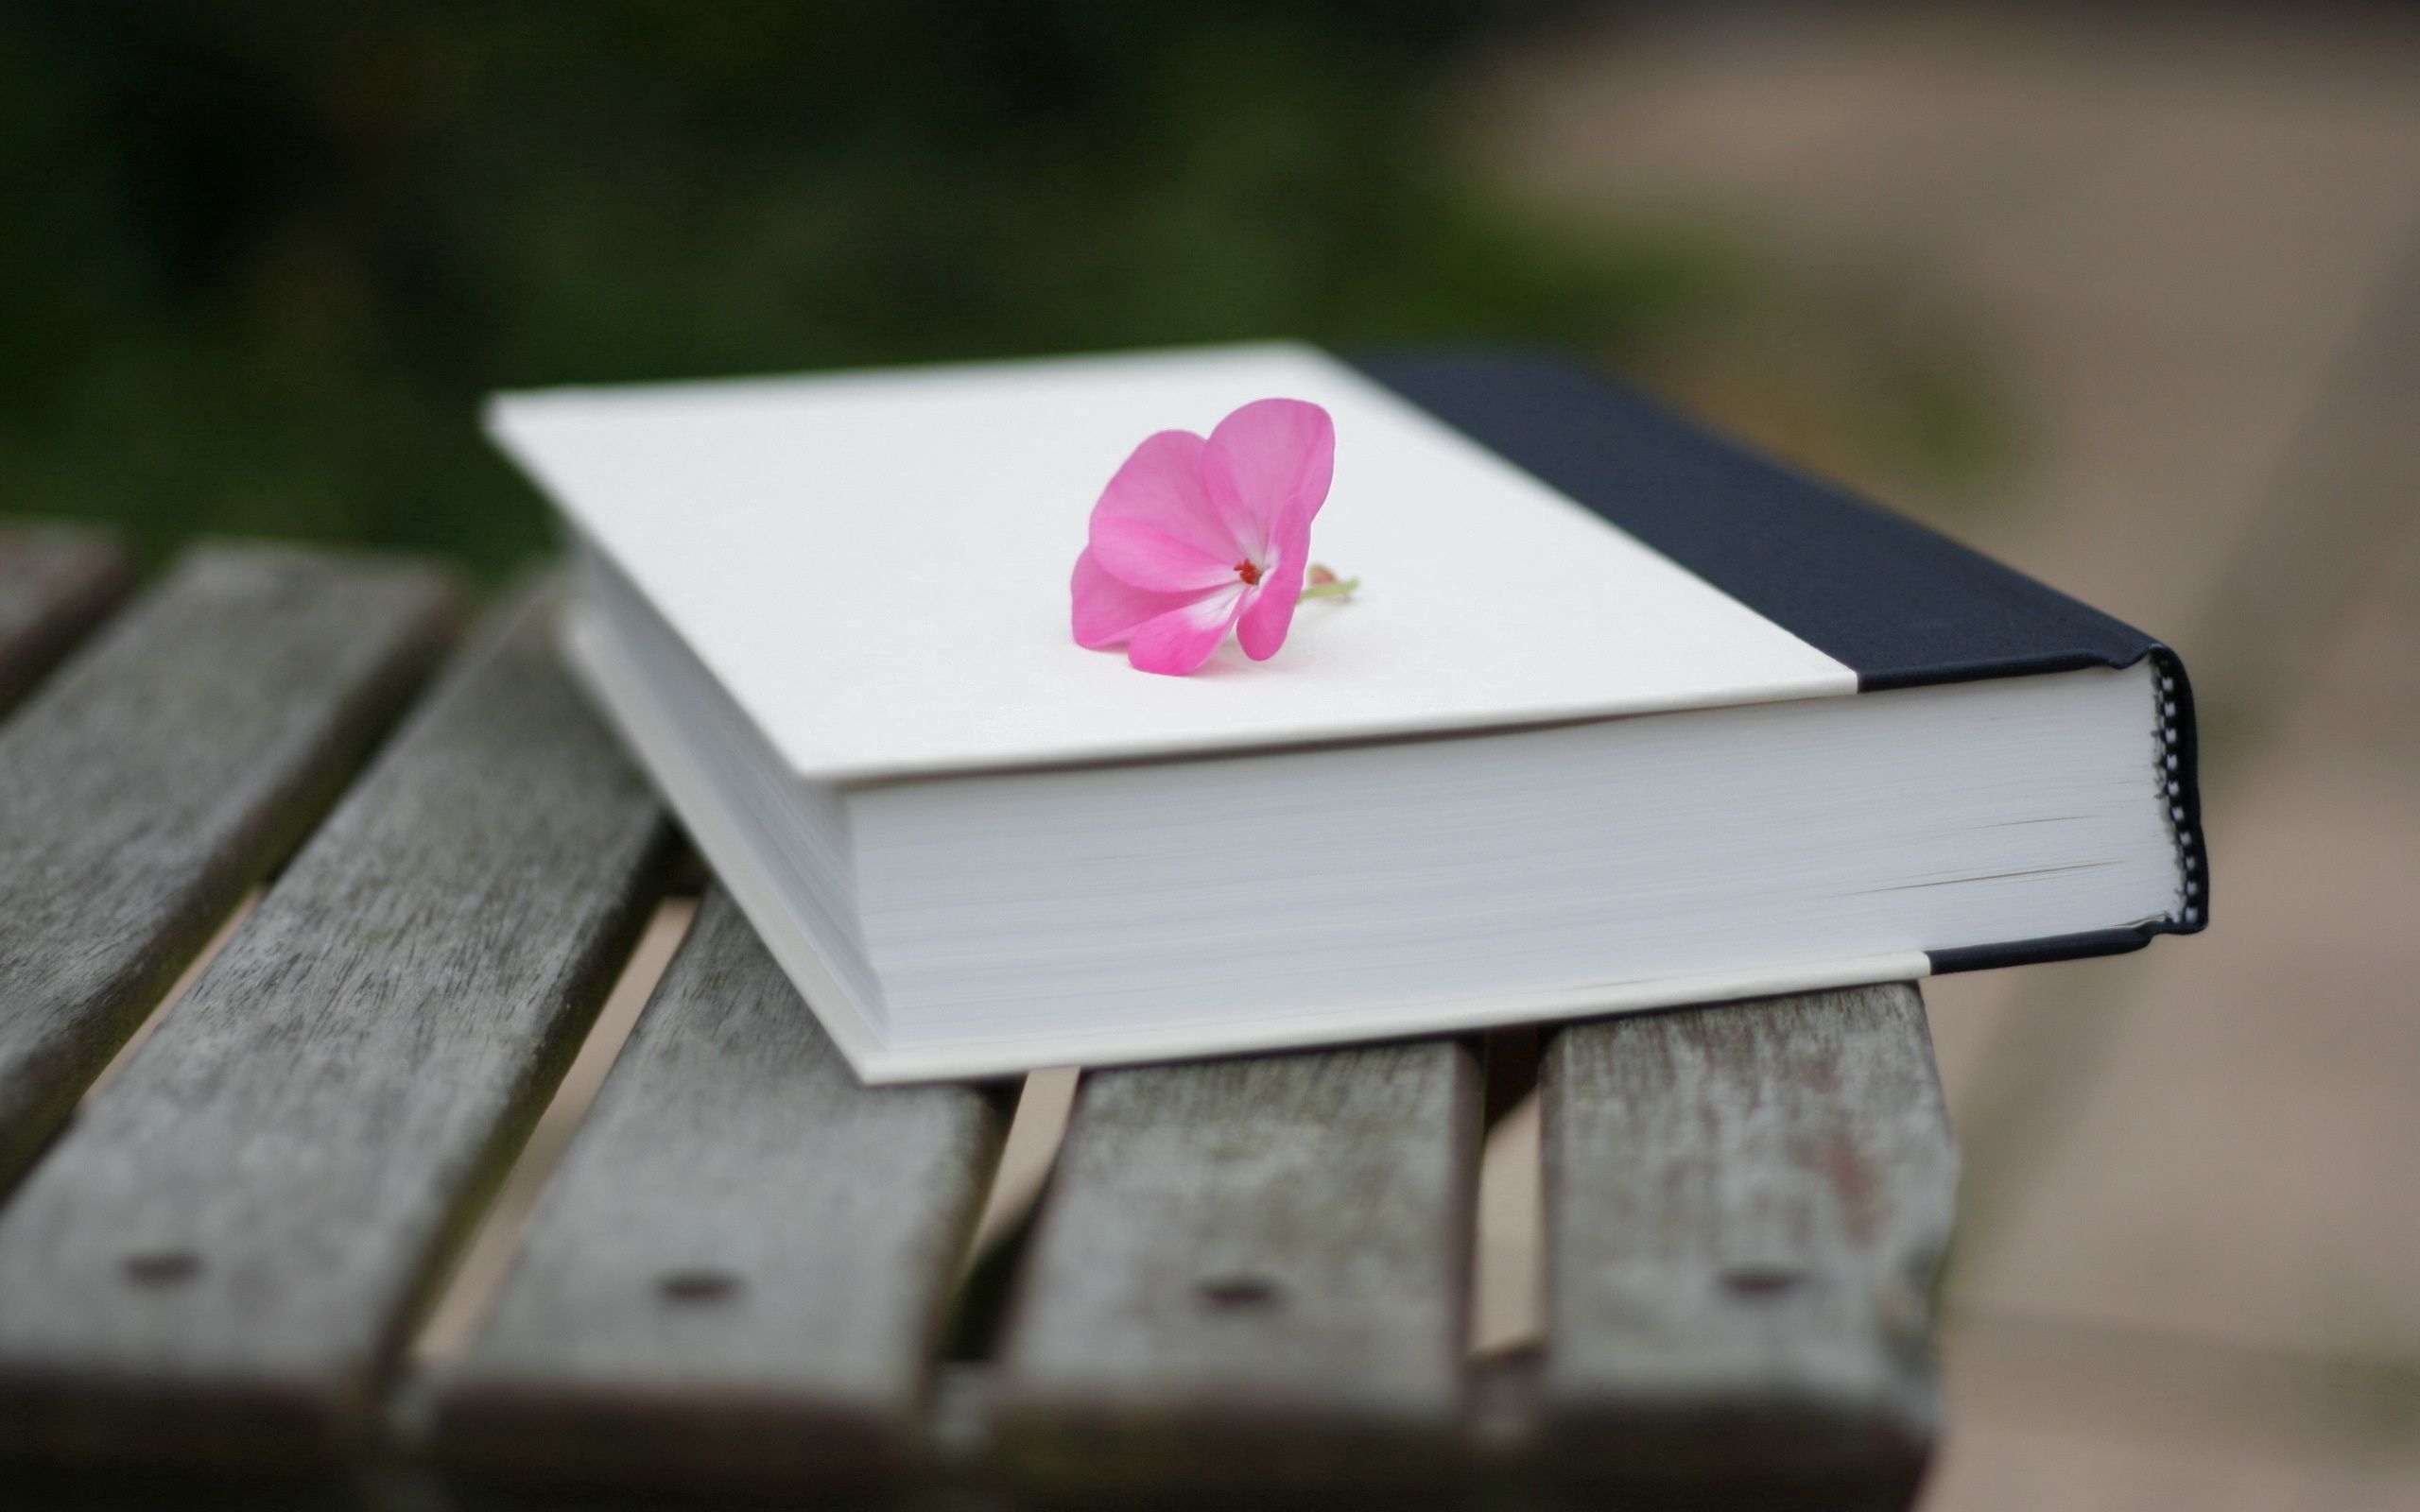 iPhone background handsomely, it's beautiful, flower, book